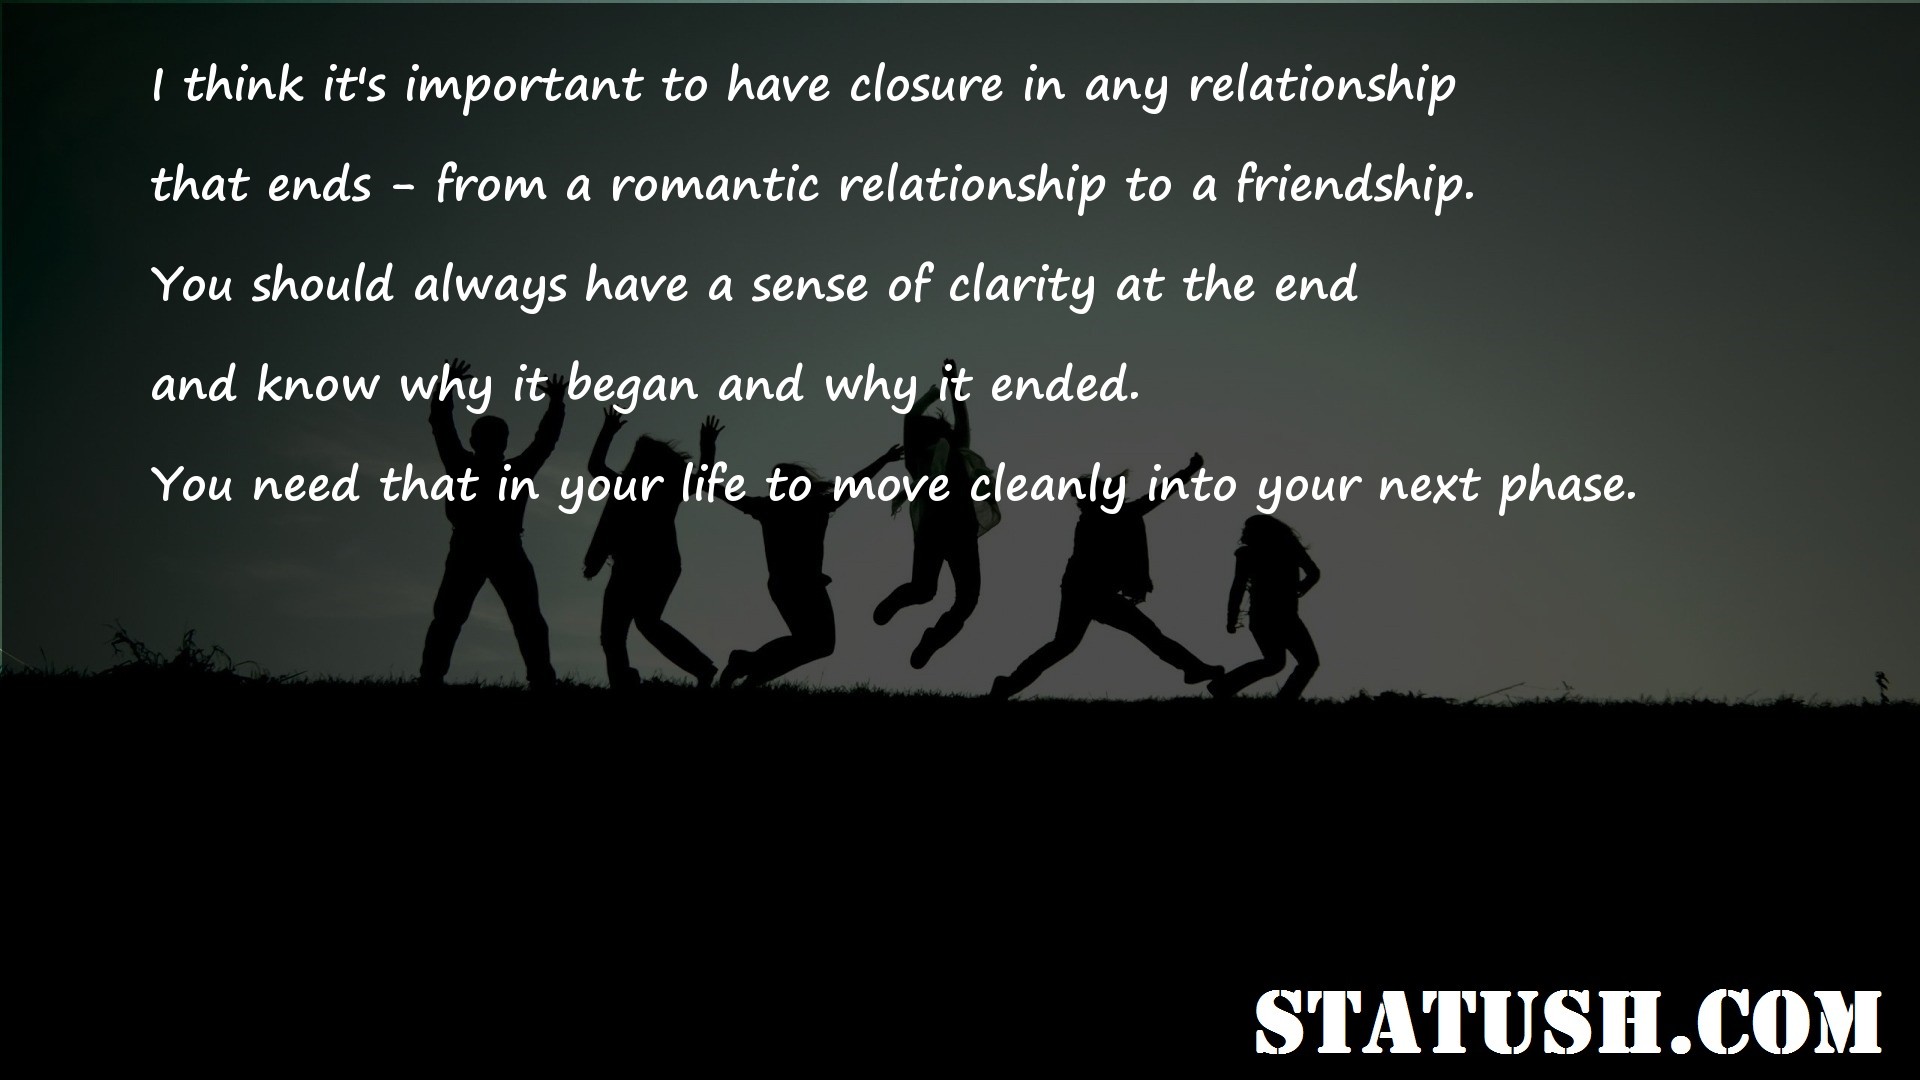 I think its important to have closure in any relationship - Friendship Quotes at statush.com